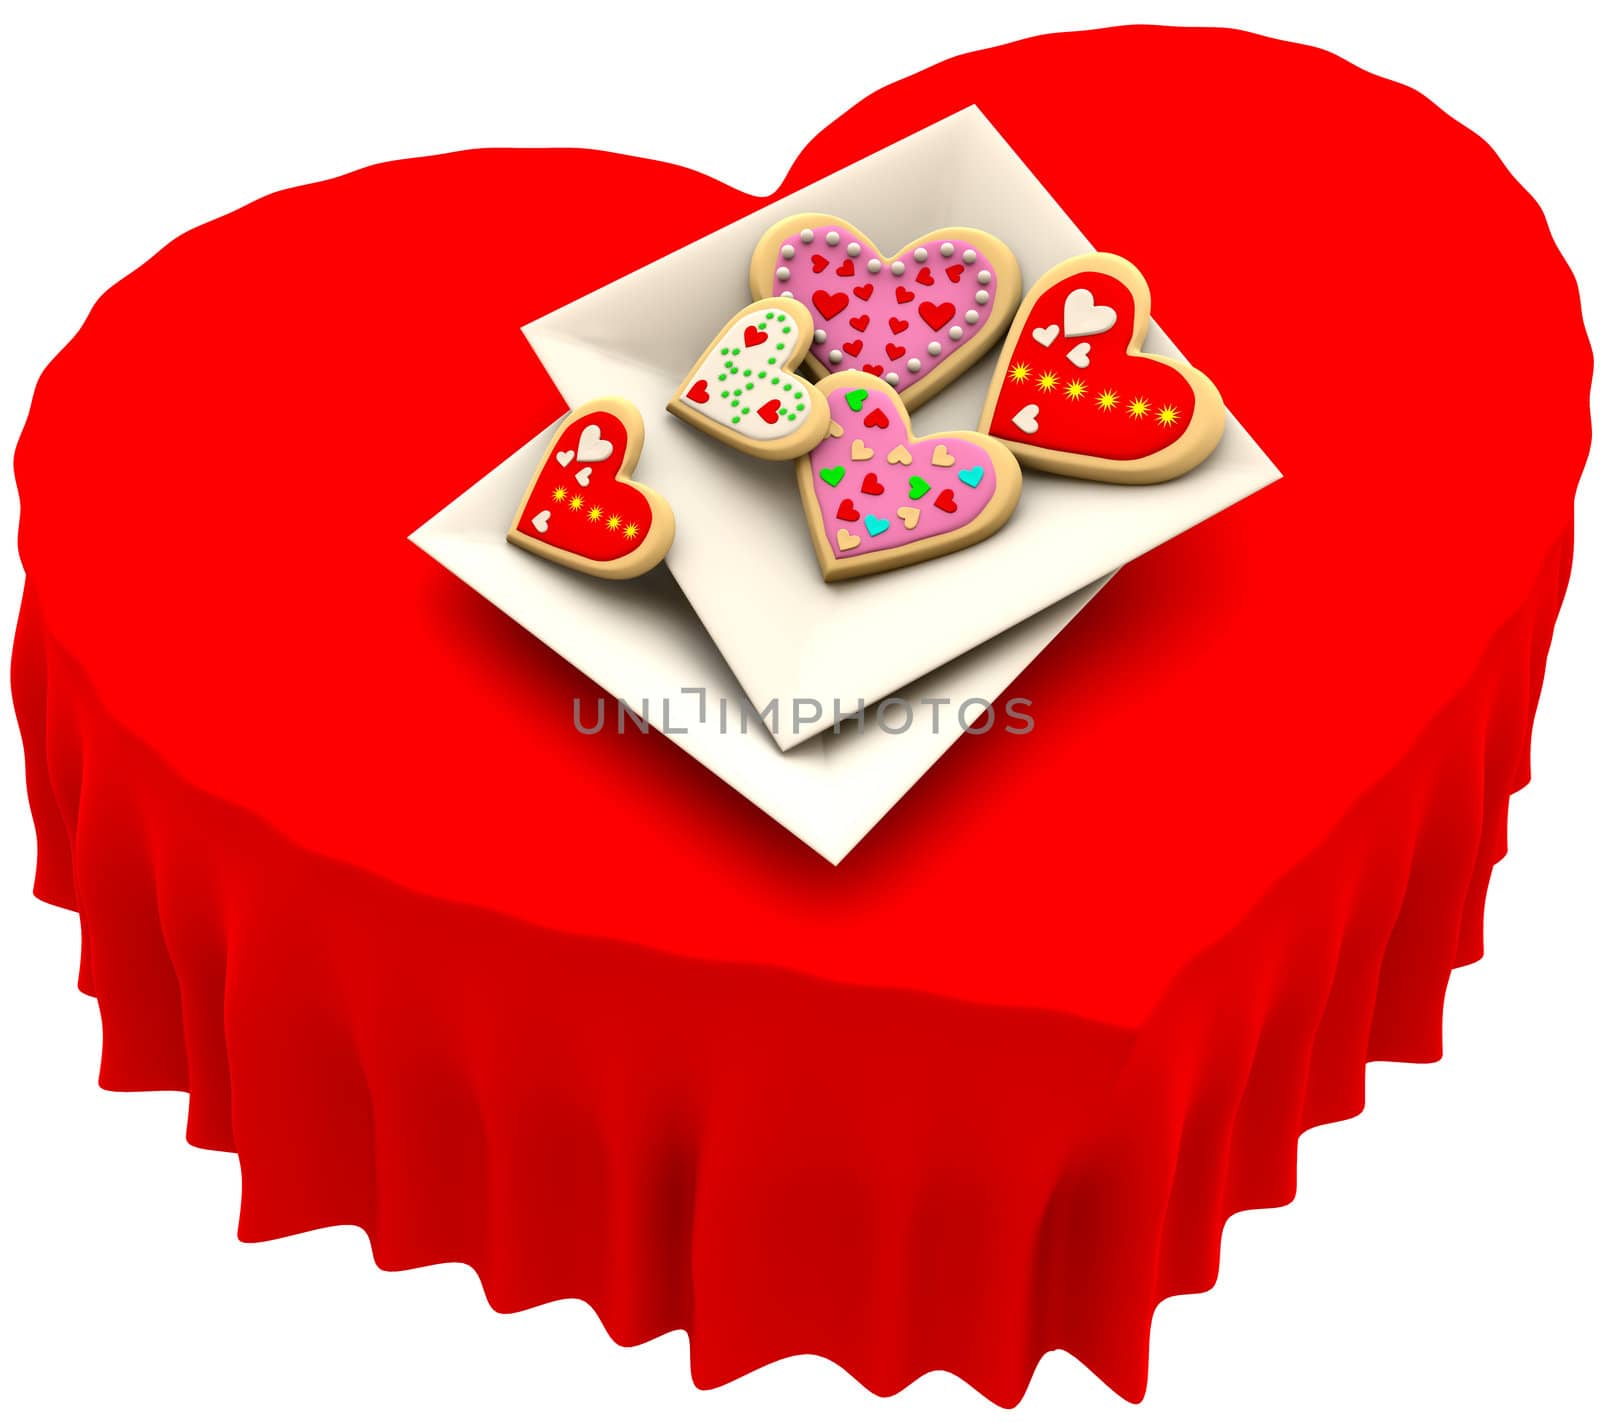 Allsorts heart-shaped cookies for Valentine's Day by merzavka